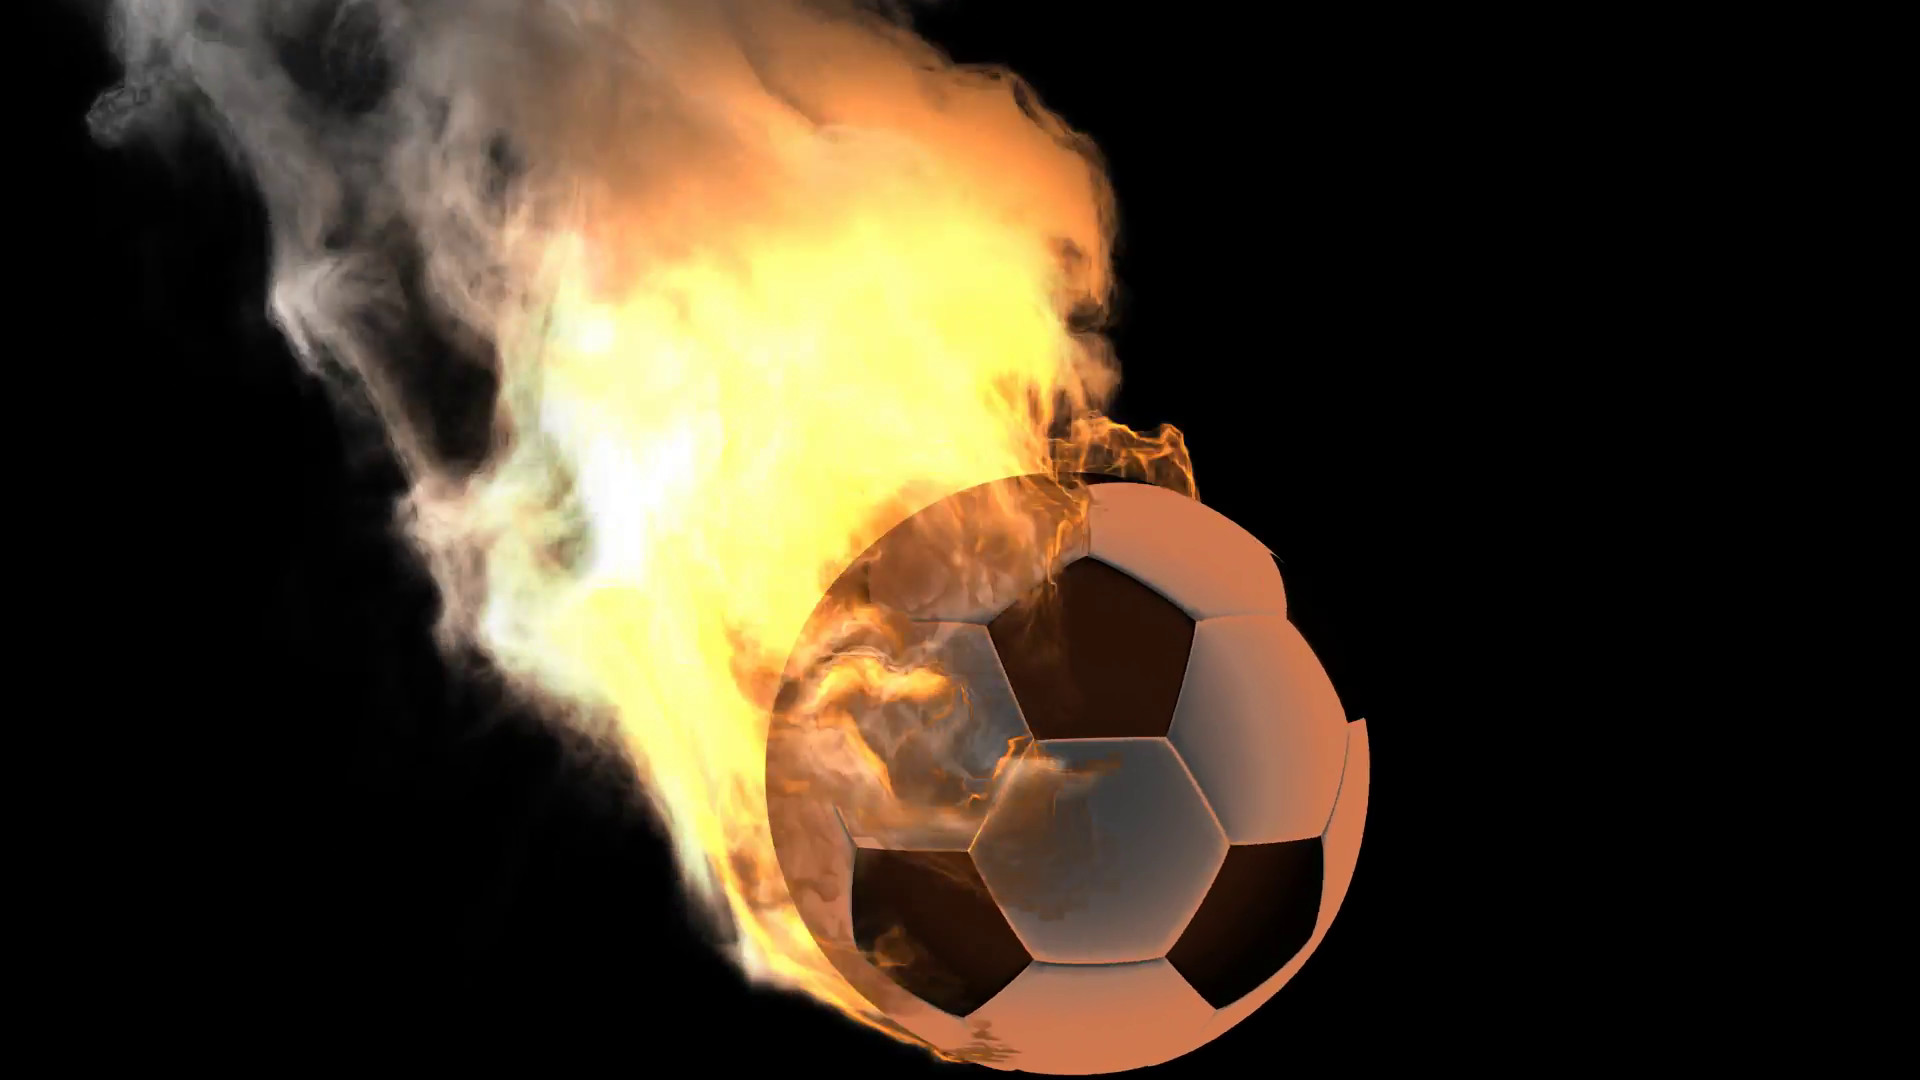 1920x1080 burning soccer ball rendered in PNG with alpha channel Motion Background -  VideoBlocks